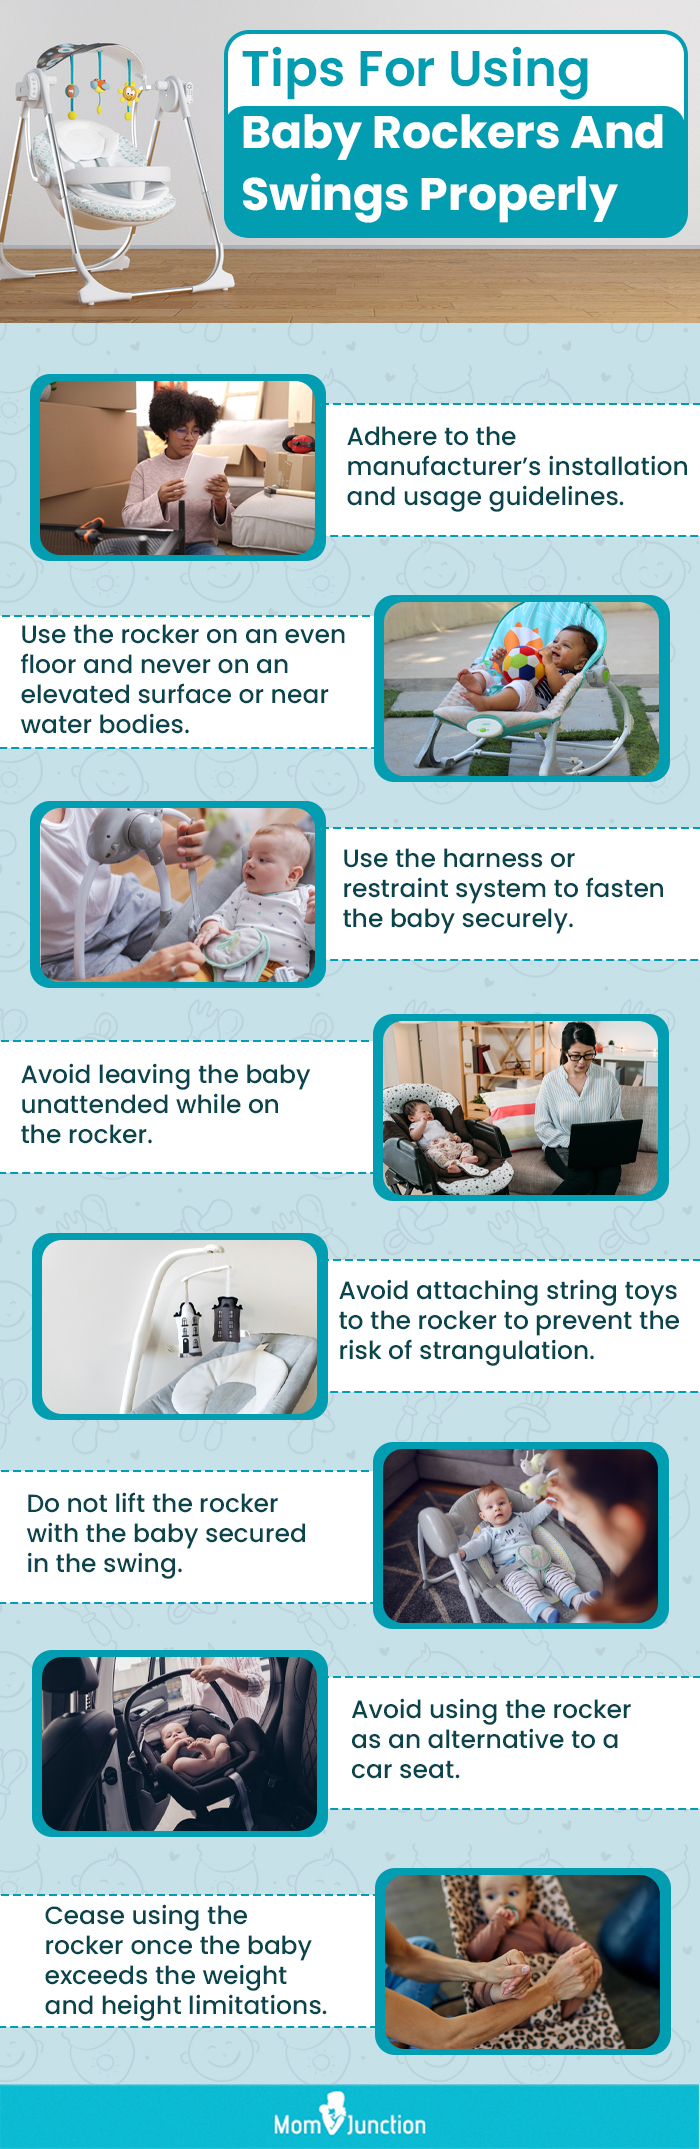 Tips For Using Baby Rockers And Swings Properly (infographic)